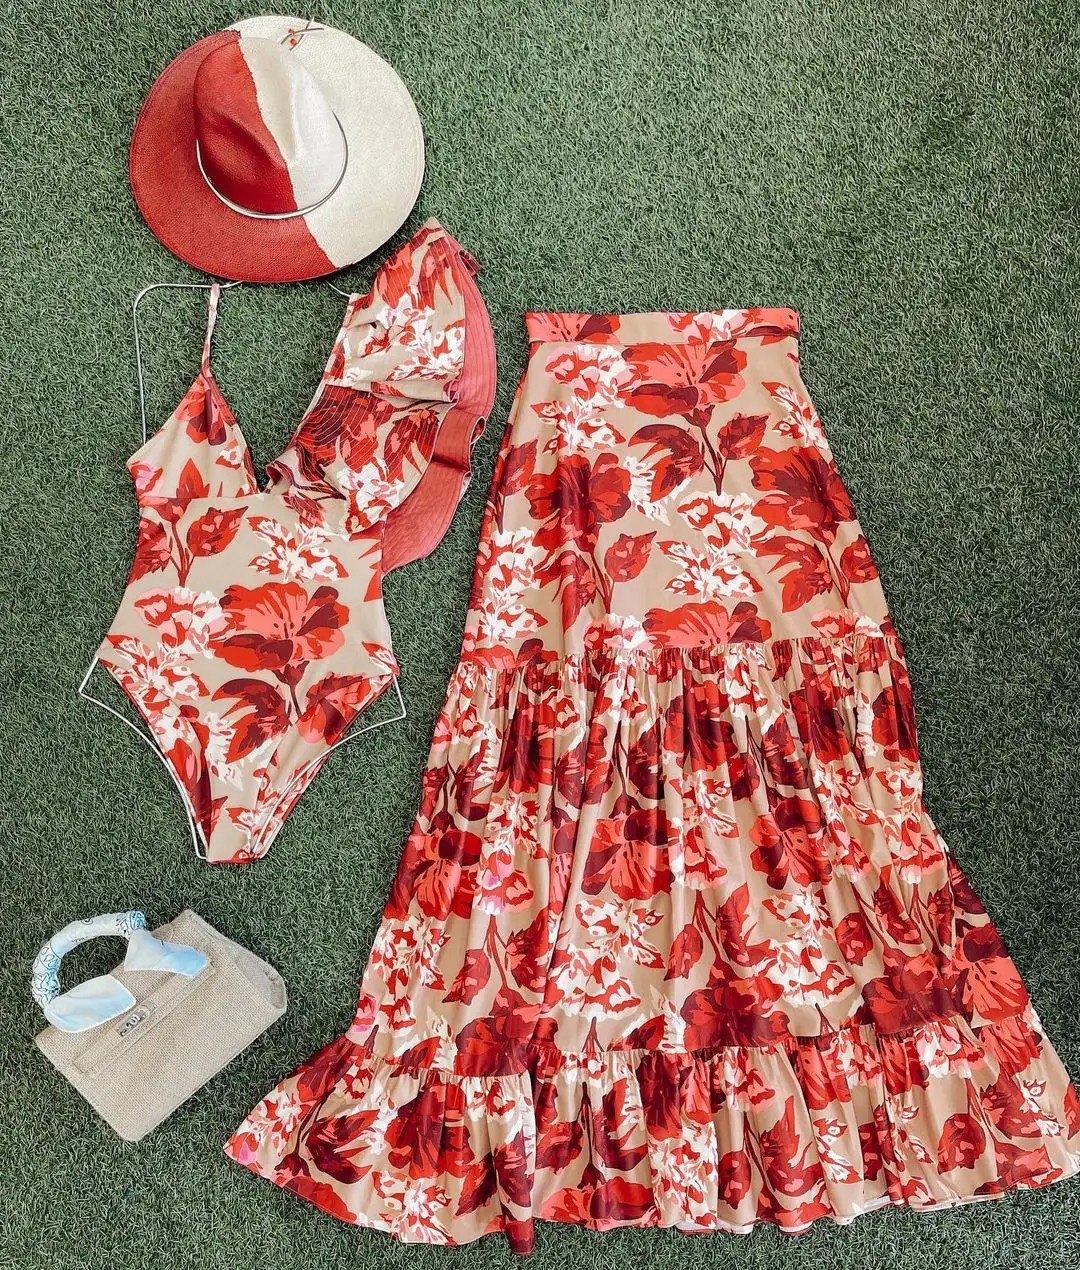 2022 New Women Ruffle Printed One Piece Swimsuit and Skirt Red Floral Beachwear Swimwear Bohemian Maxi Dresses for Girl